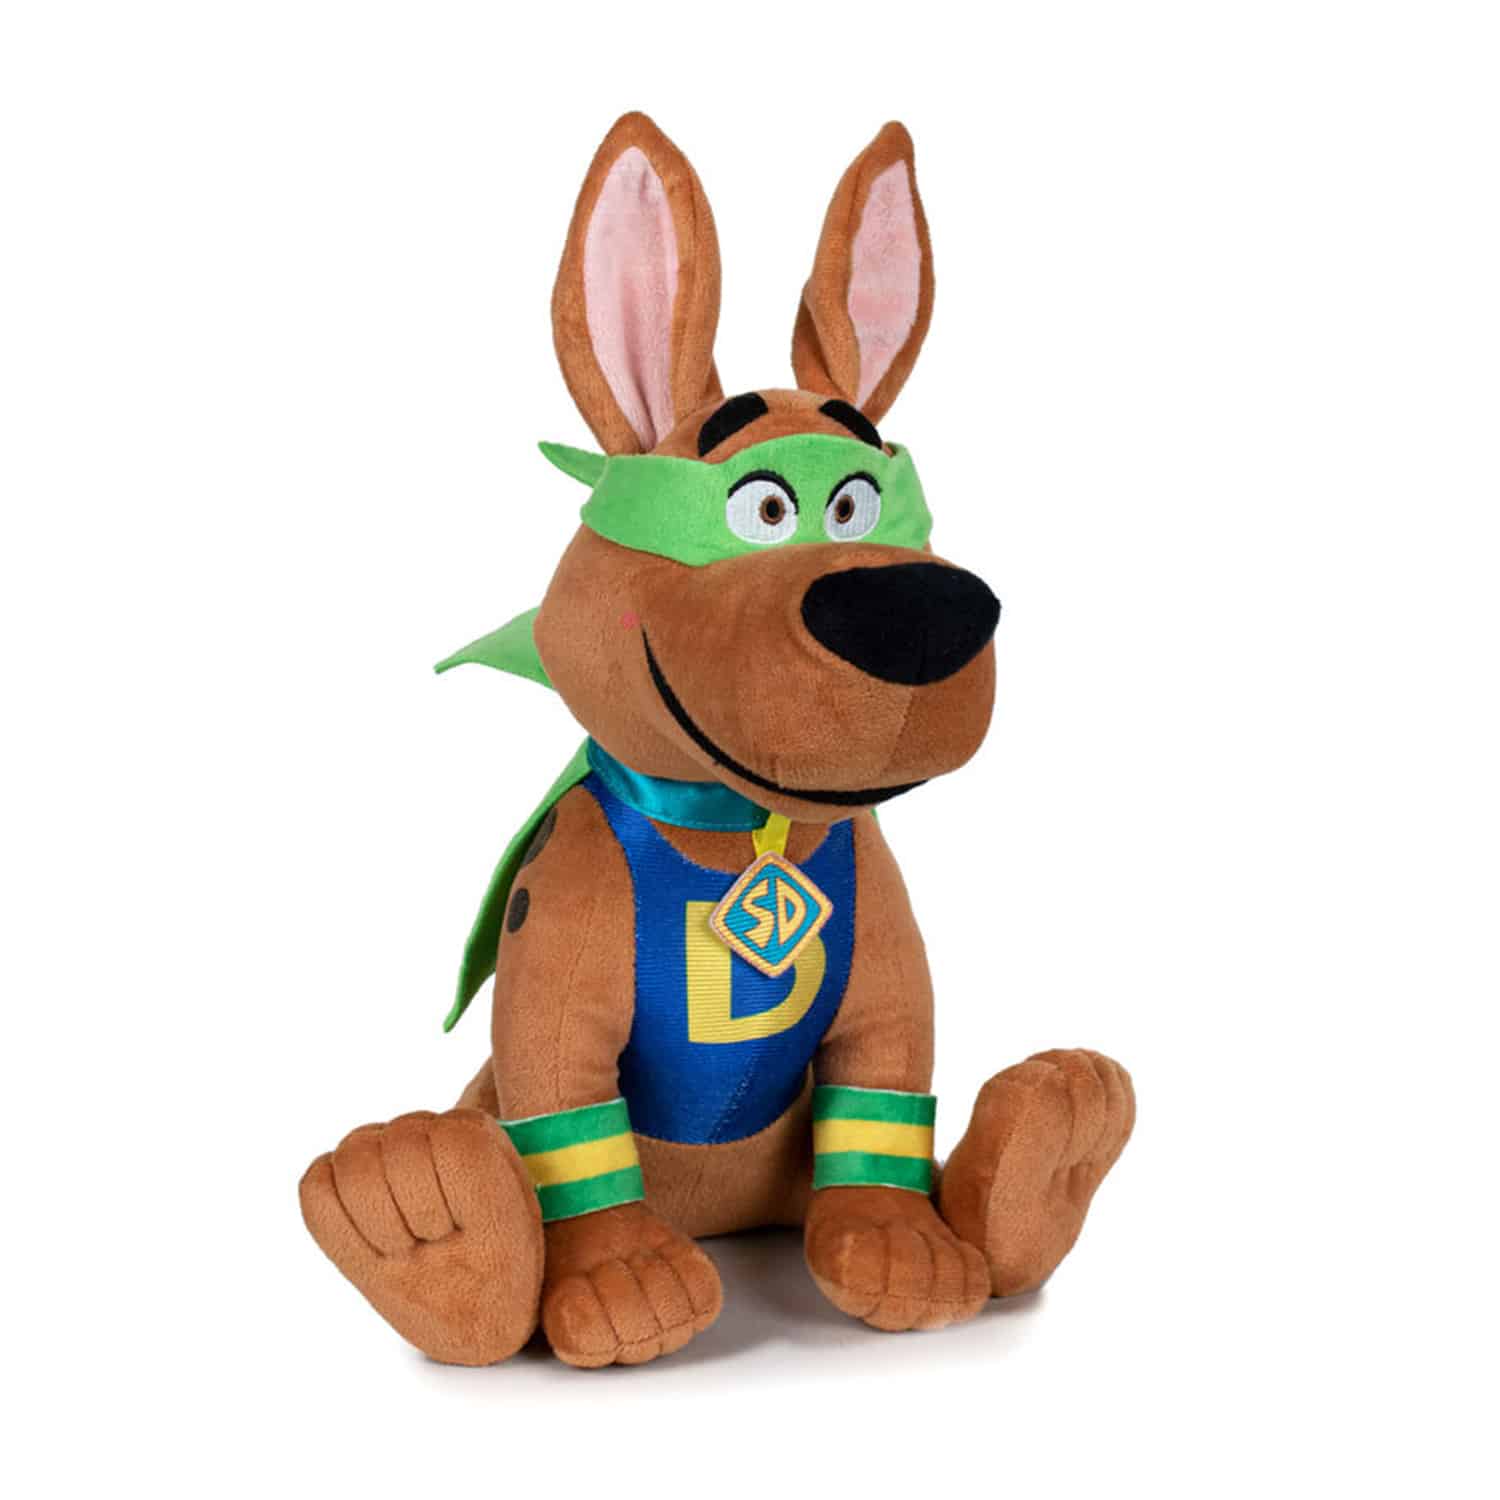 Scooby-Doo - Scoob Young Super Dog Plush Toy